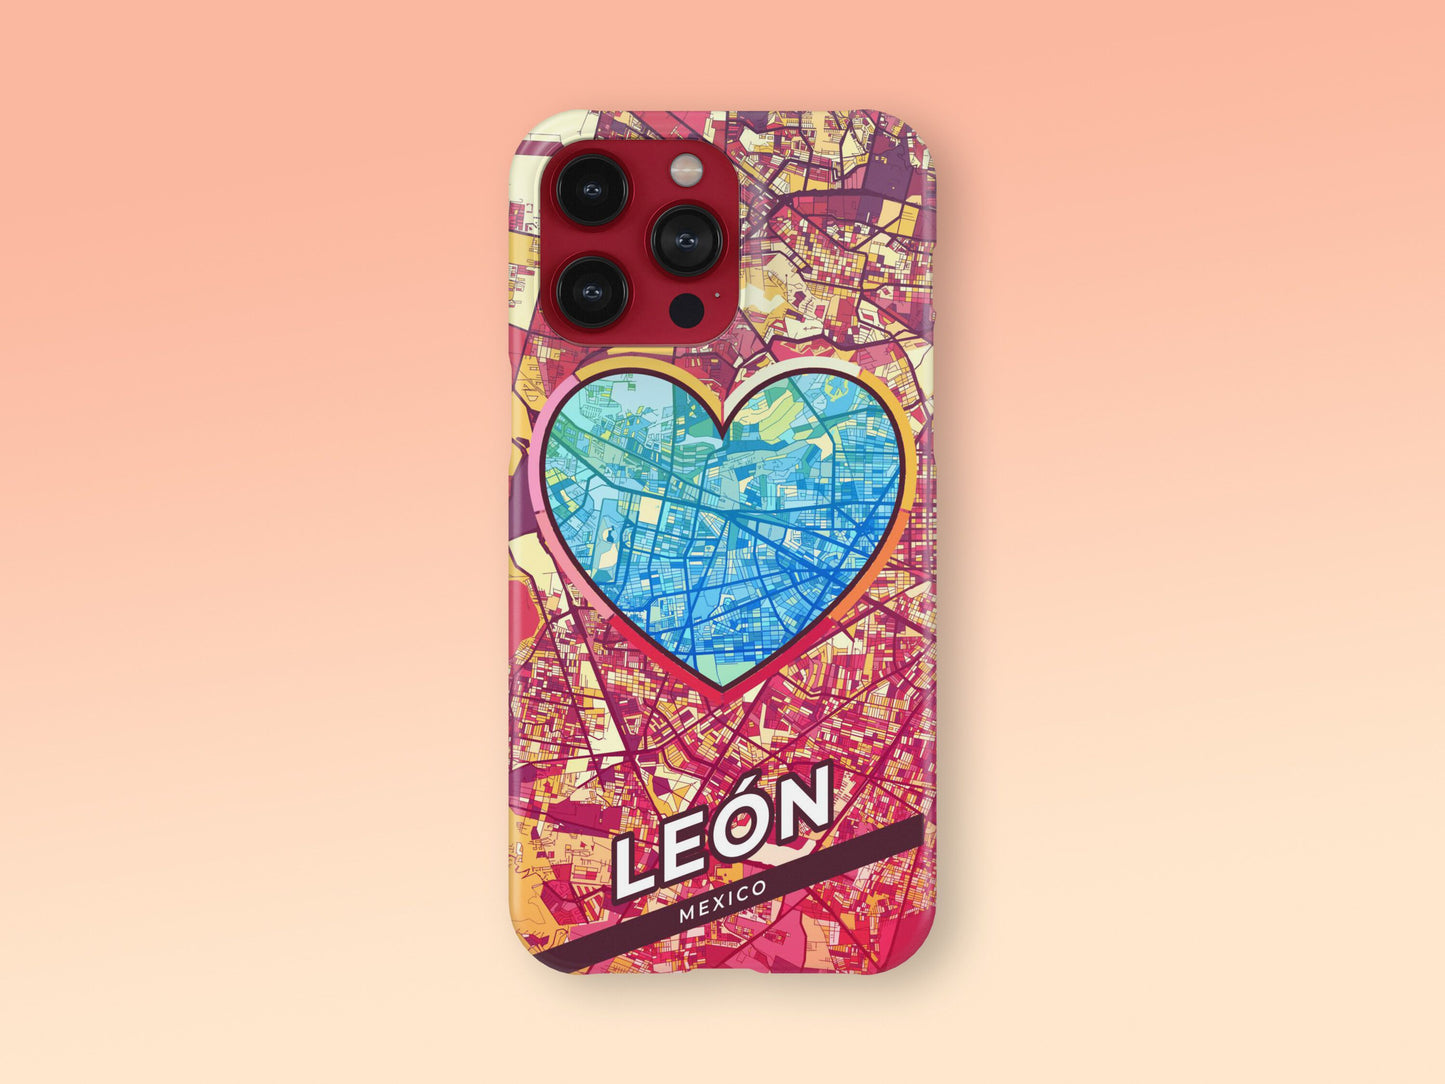 León Mexico slim phone case with colorful icon. Birthday, wedding or housewarming gift. Couple match cases. 2